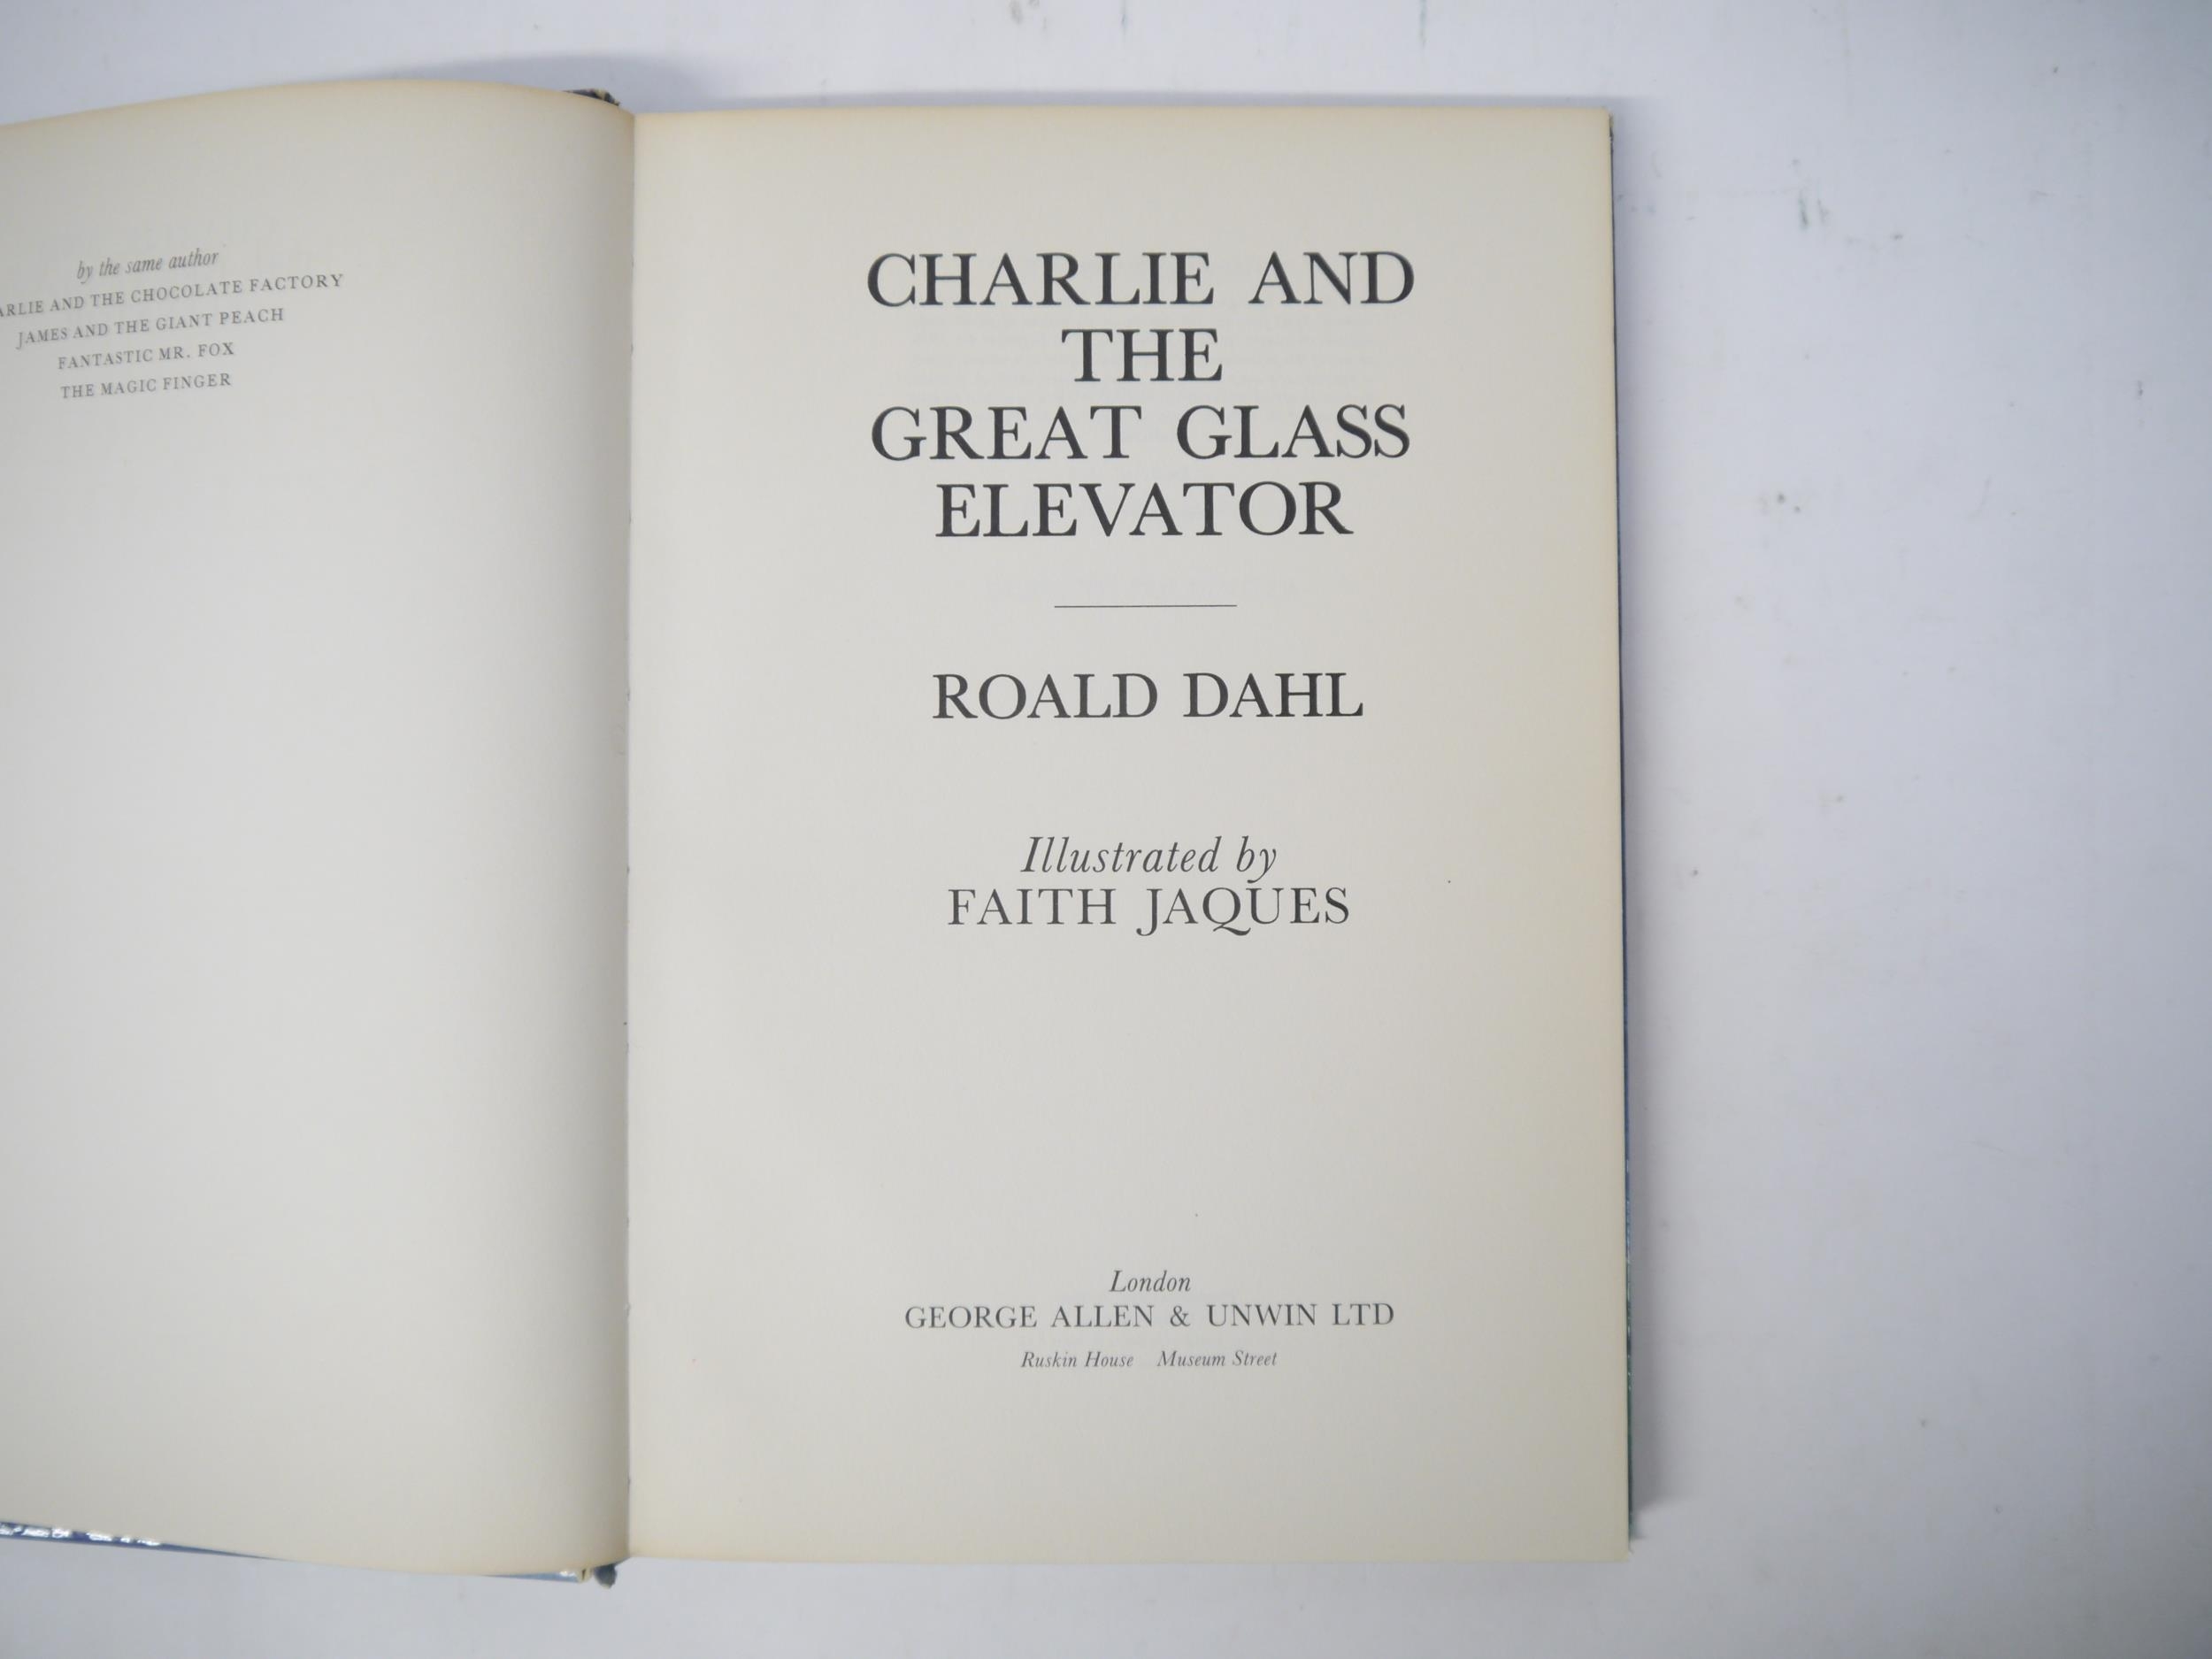 Roald Dahl: 'Charlie and the Great Glass Elevator', London, George Allen & Unwin, 1973, 1st edition, - Image 2 of 7